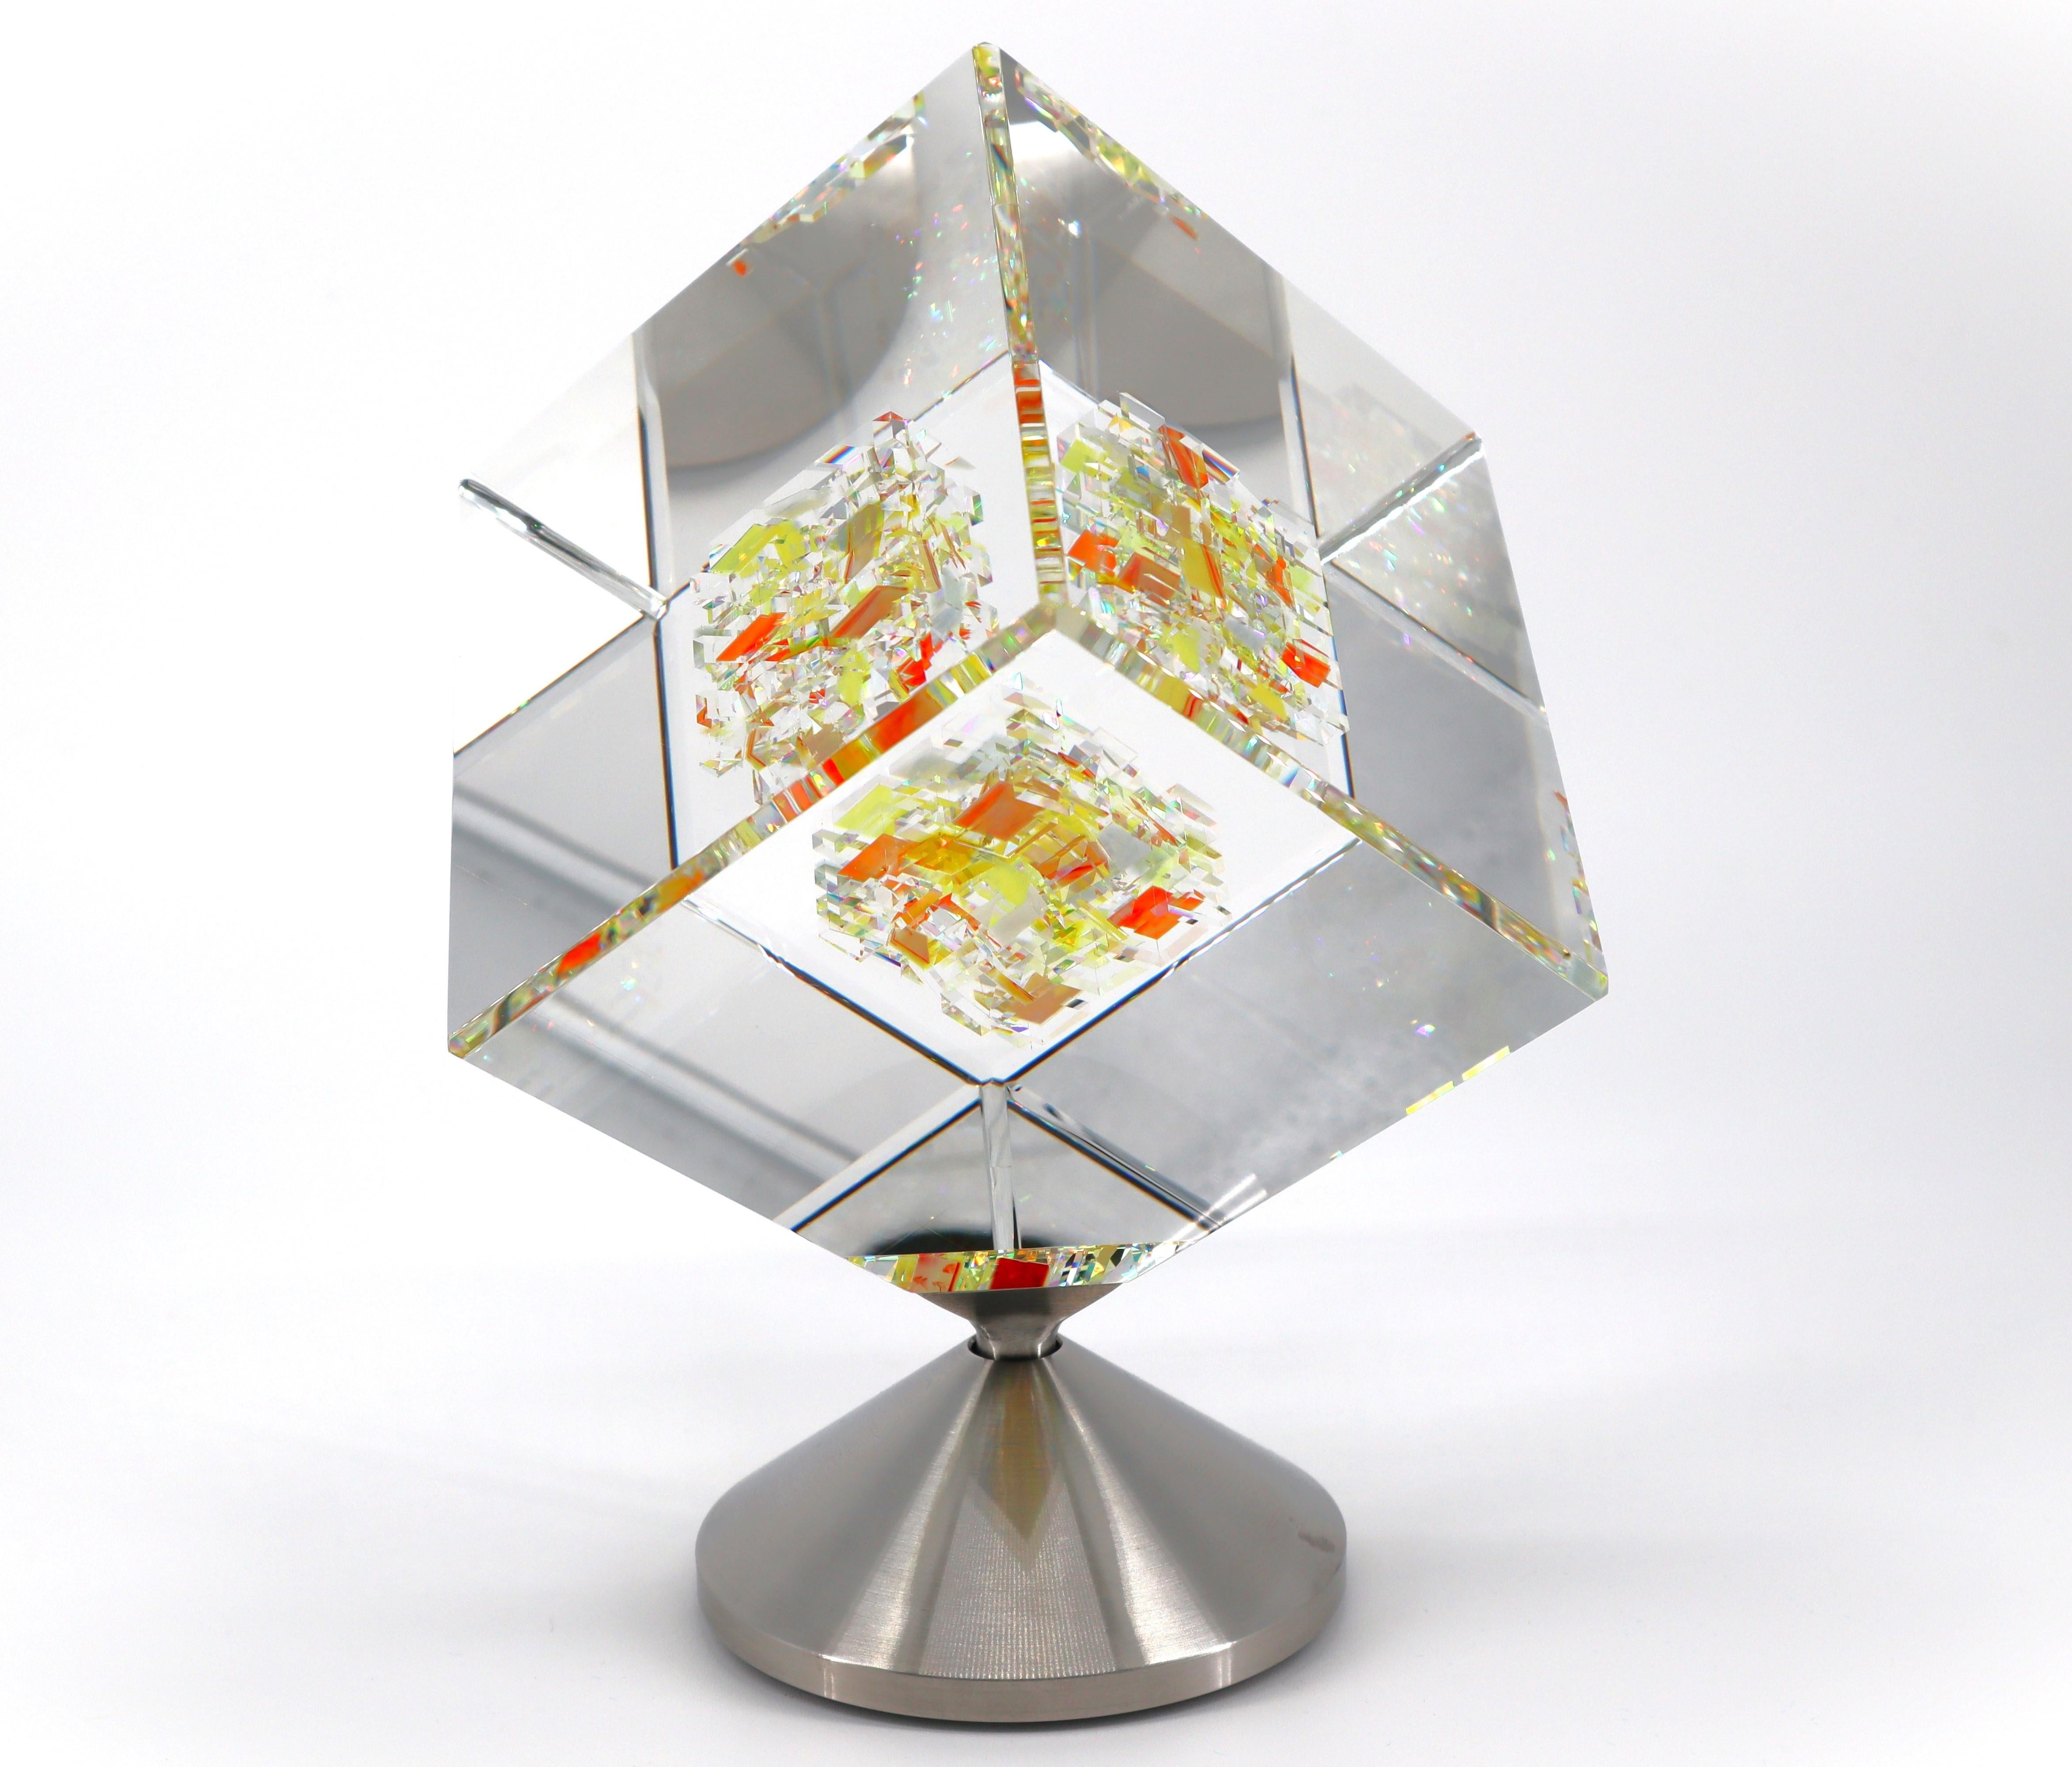 ‘Sunflower’, by Jon Kuhn, made in Kernersville, North Carolina
Medium: 5 layers Glass Art Cube Sculpture on rotating stainless steel base.
Dimensions - H: 6.5" x 6.5 x 9.5 H Inches
Condition - Mint
Titled "Sunflower" Signed "Jon Kuhn - Golden Sun,